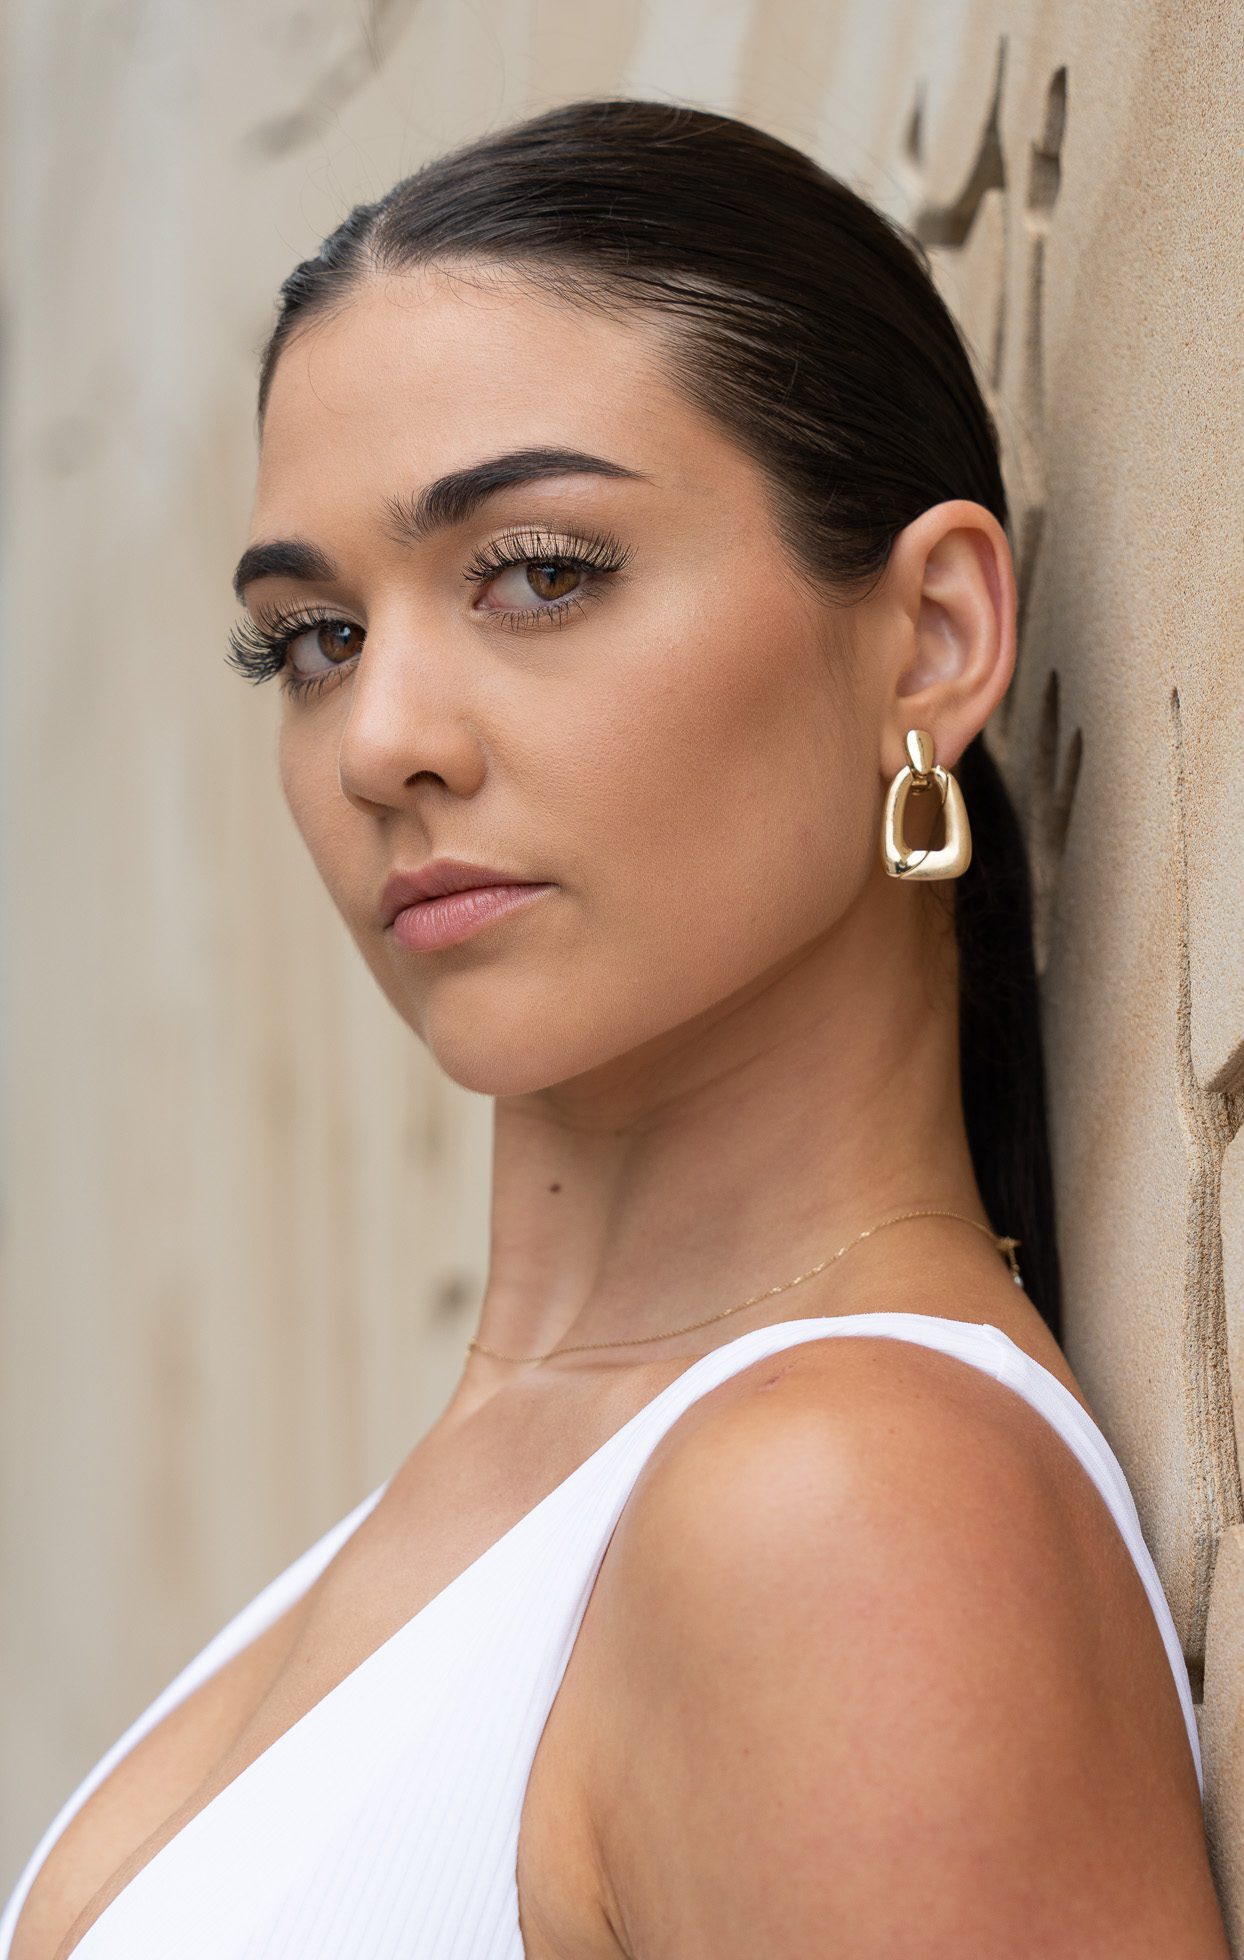 dark-haired model looking directly at the camera, wearing a white top and gold earrings standing in front of a sandstone wall and being photographed by Georgie Greene Photography for the portraits webpage